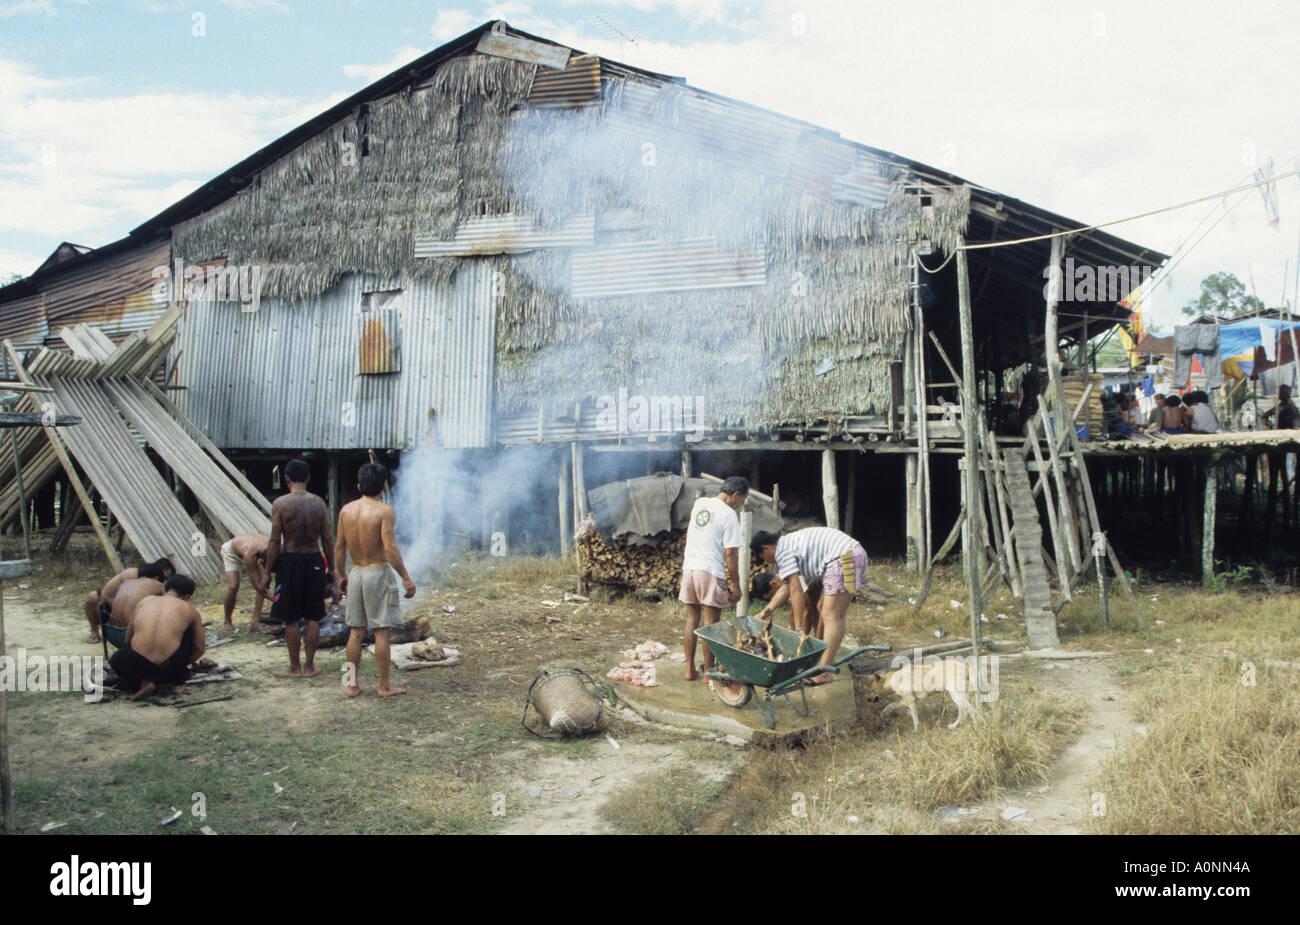 Preparing pigs and chickens for the feast at the Dayak longhouse on Rajang river Sarawak Malaysia Stock Photo